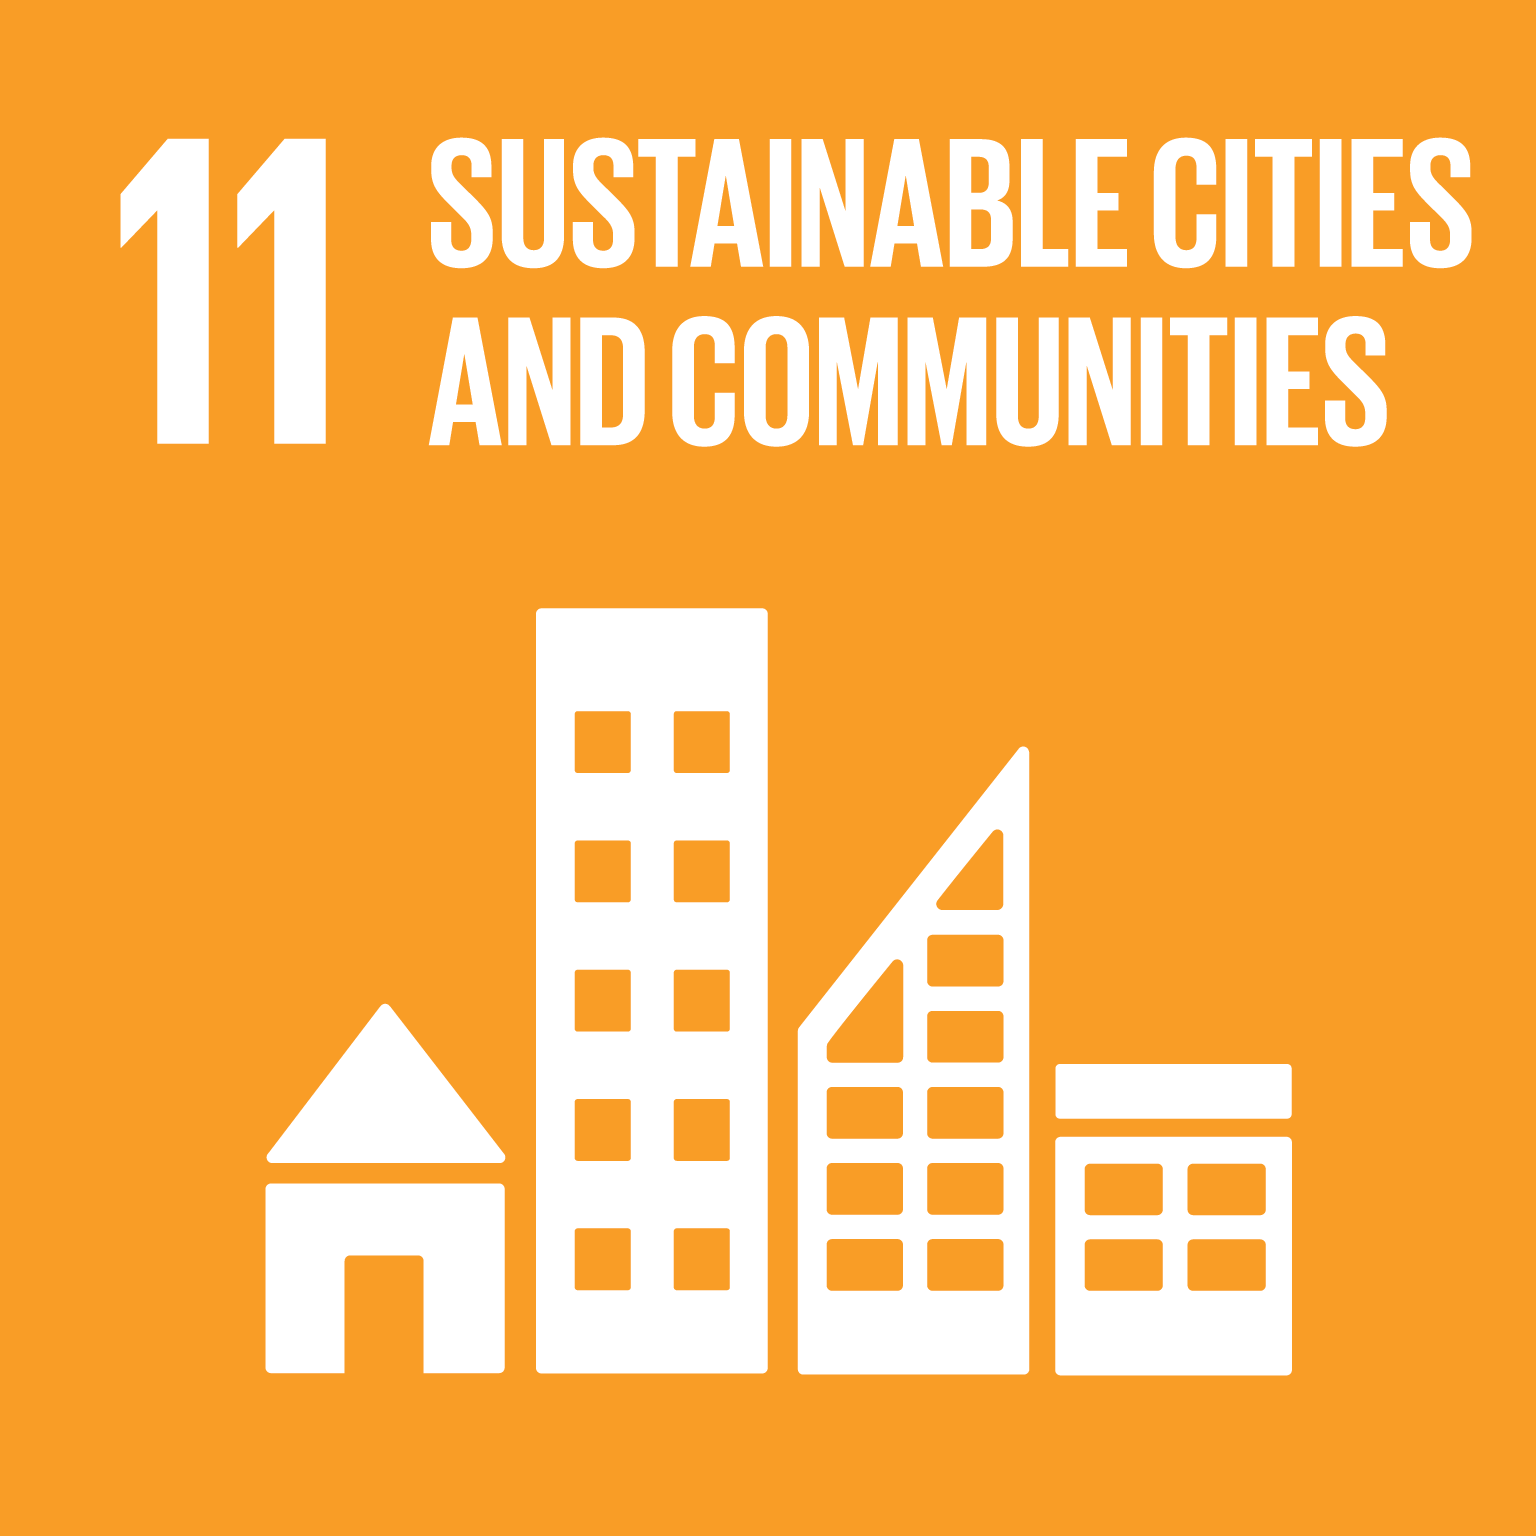 sustainable development goal 11 icon sustainable cities and communities